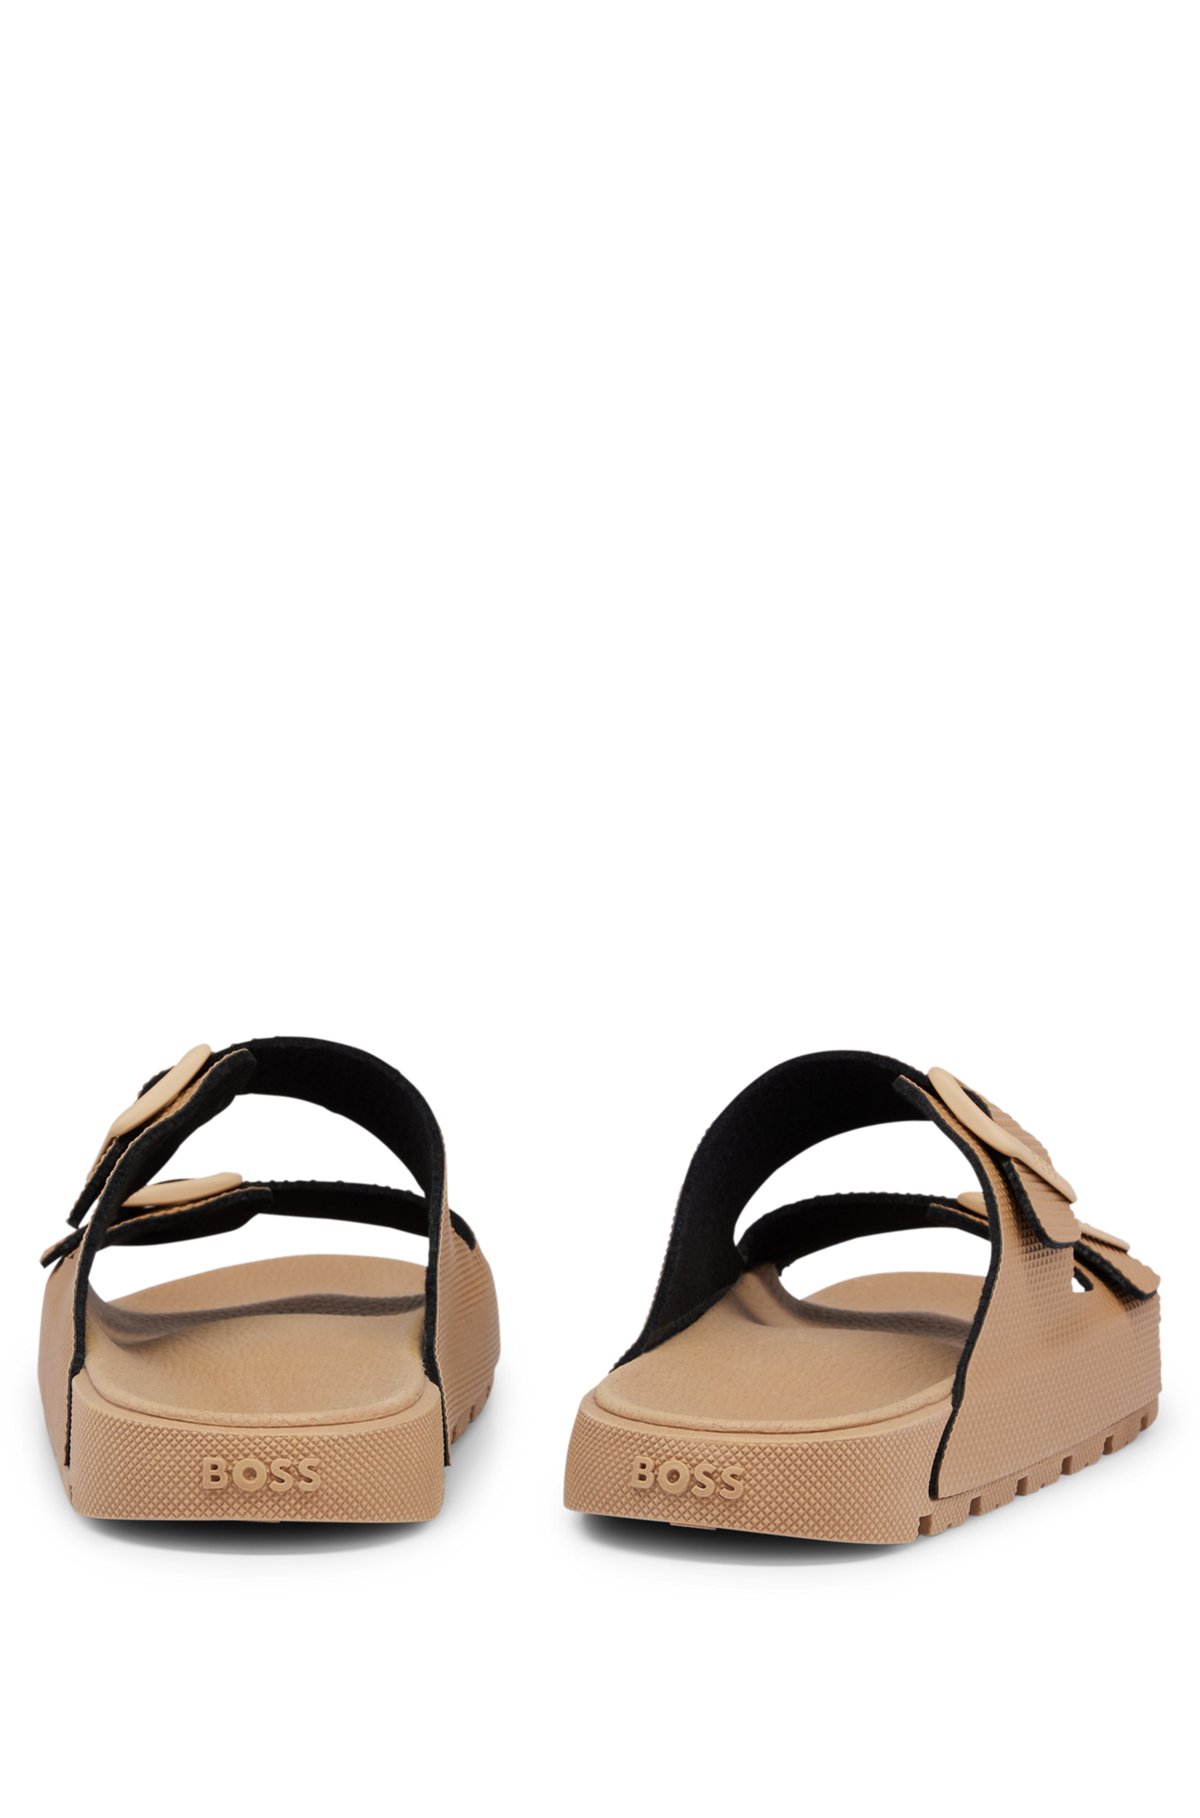 Sandals with structured double straps, Beige